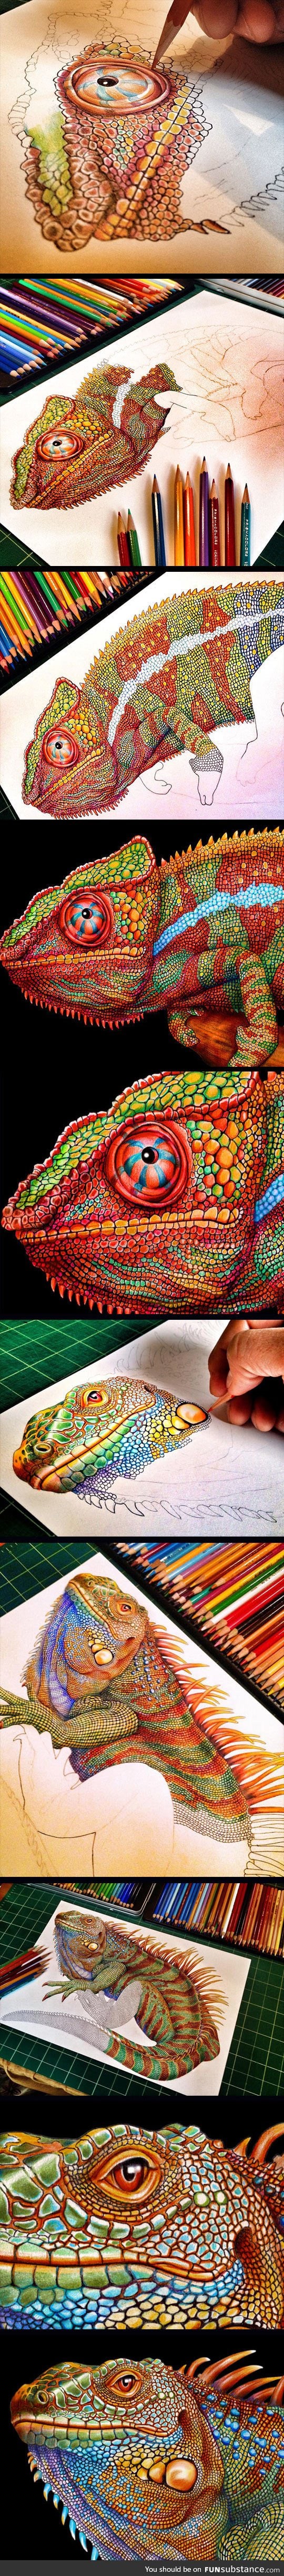 Incredibly Detailed Drawing Of A Chameleon Using Color Pencils